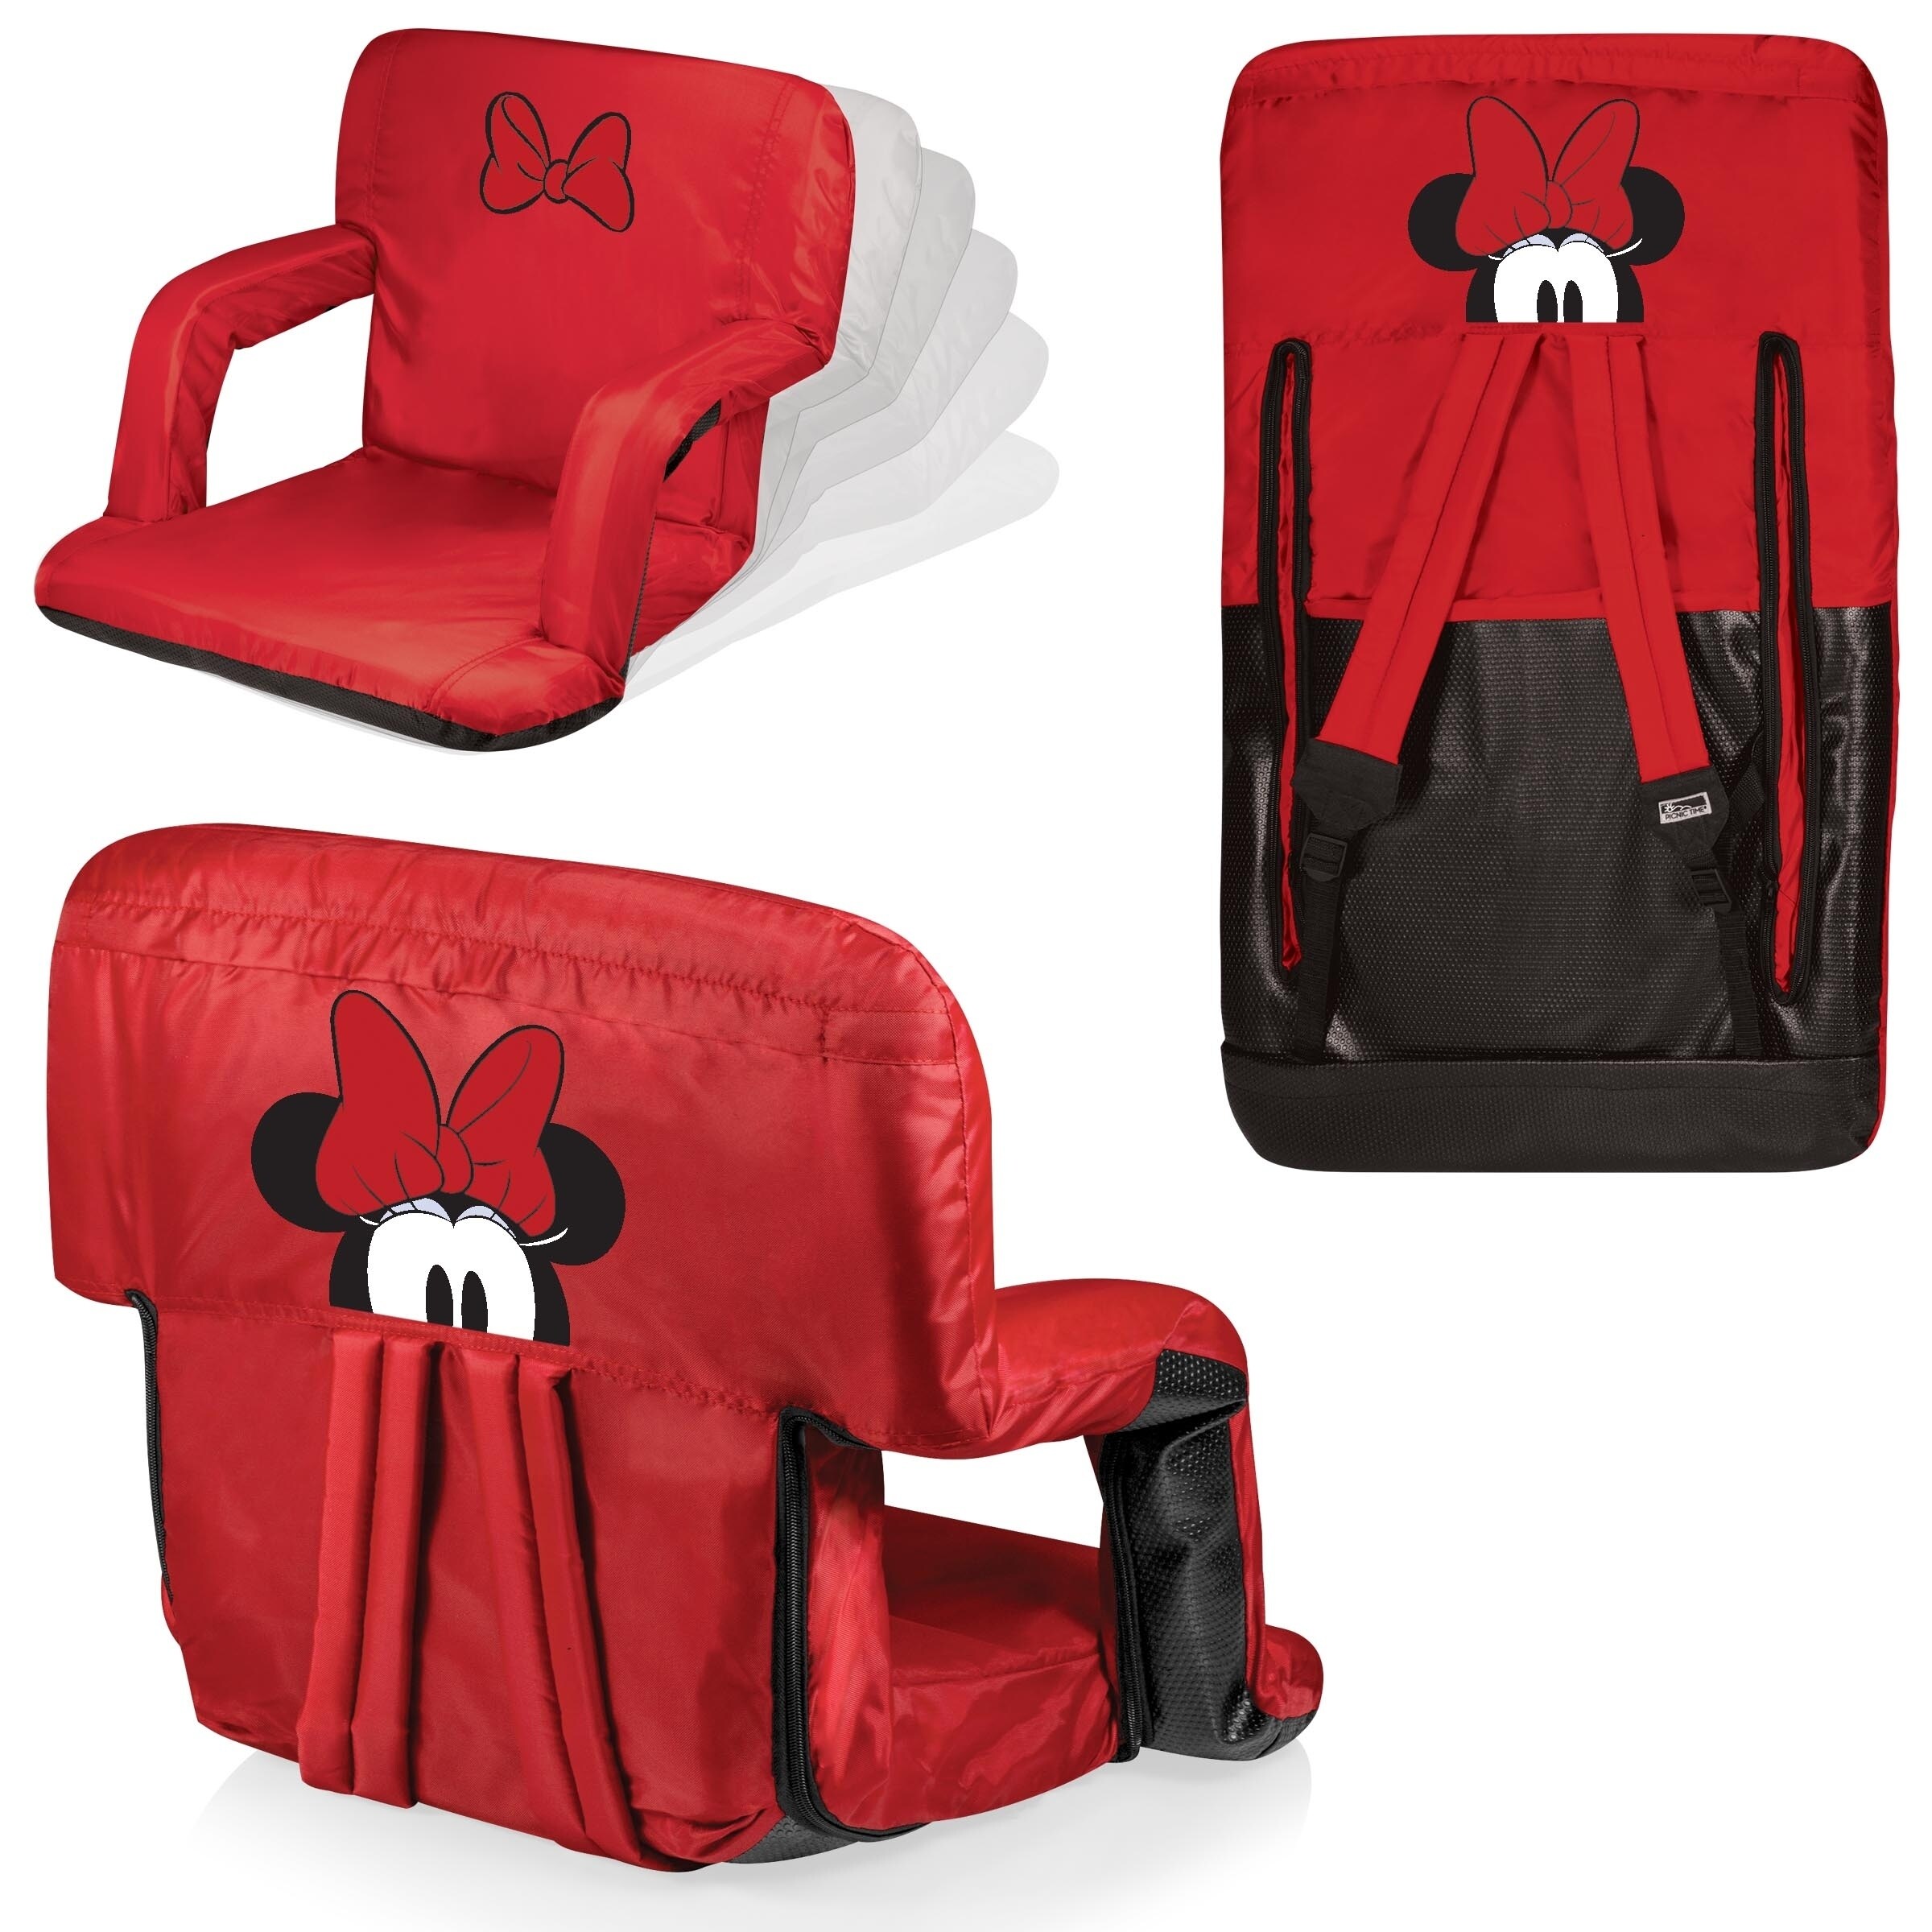 minnie mouse recliner